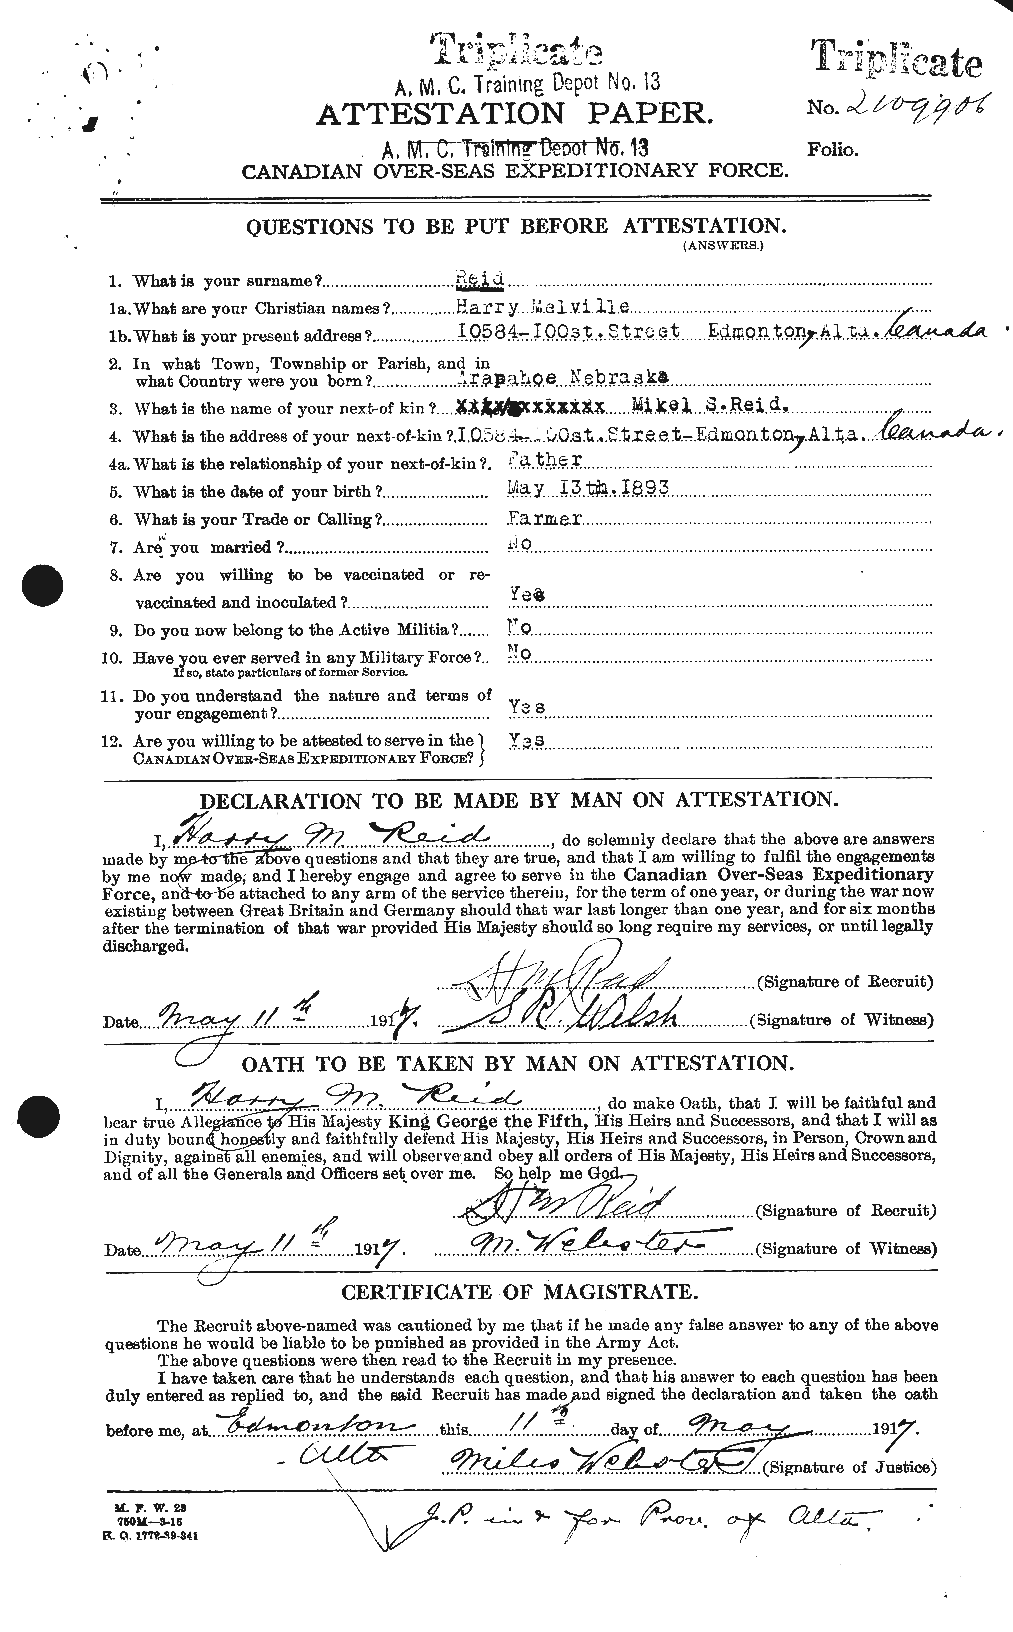 Personnel Records of the First World War - CEF 598587a